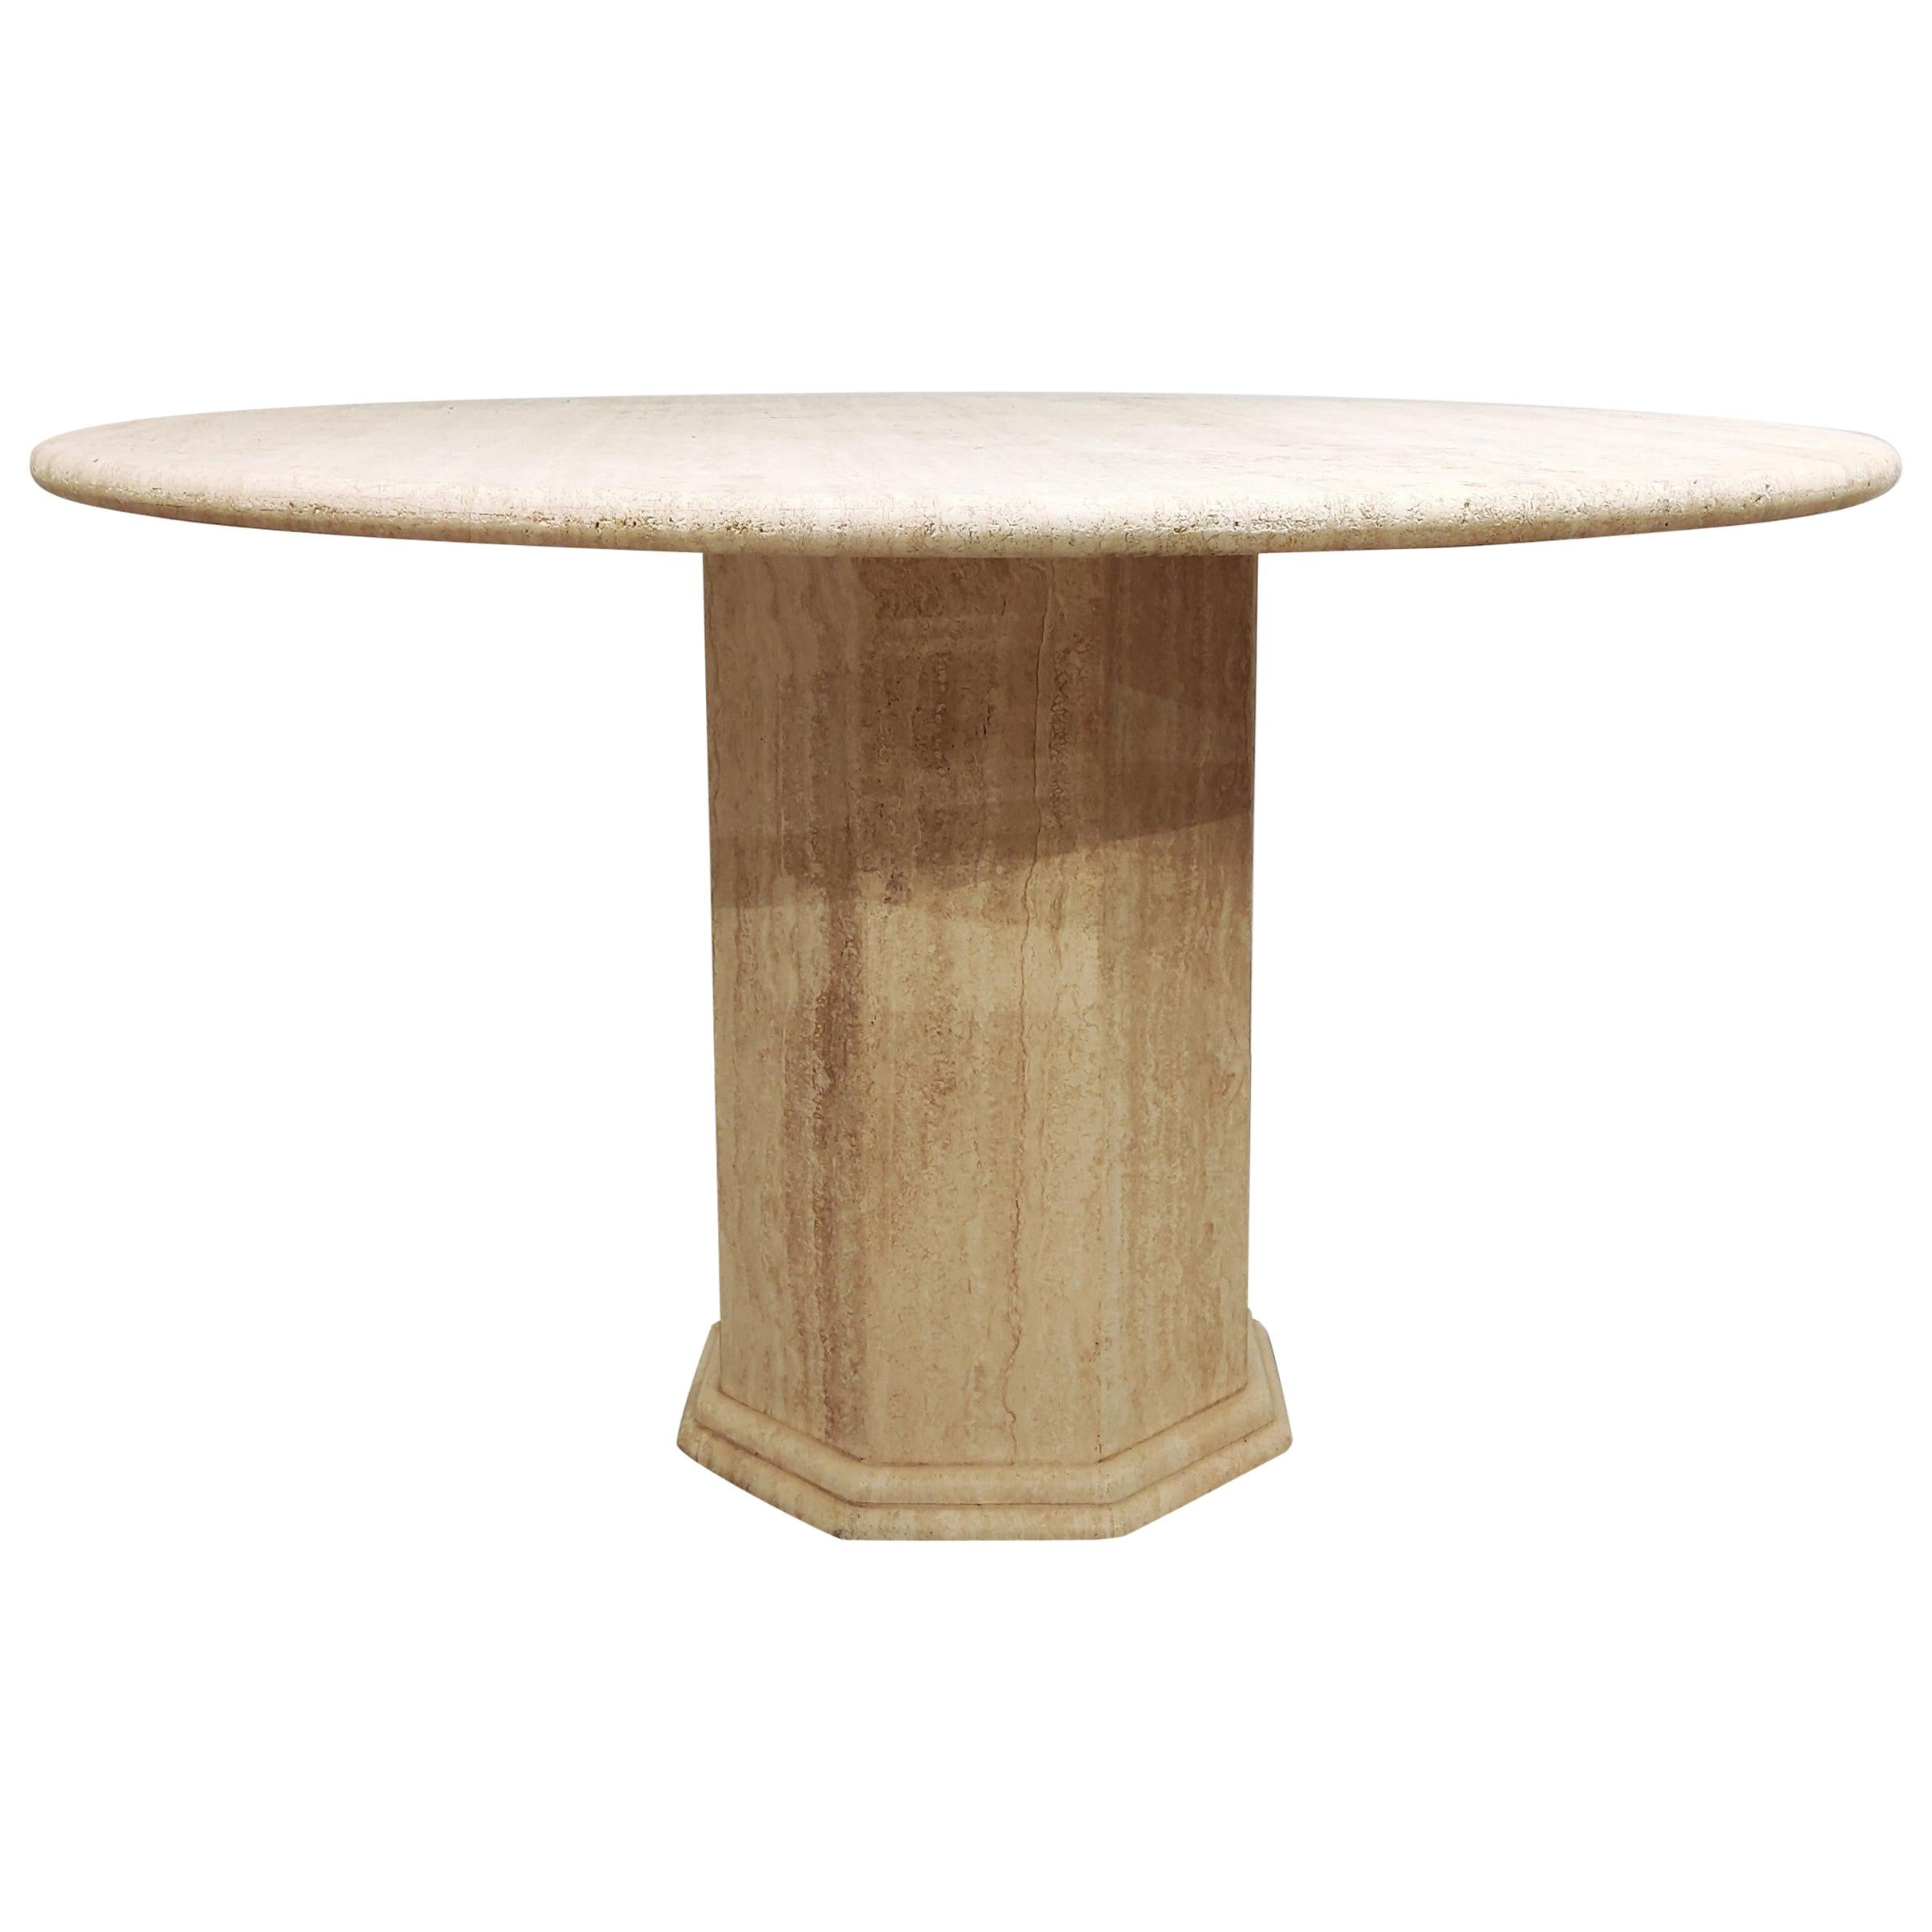 Beautiful dining table made from travertine stone.

Beautiful travertine material with the natural 'holes' in the stone.

Nicely finished round top.

Good condition

1970s - Italy

Measures: Height 74cm/29.13